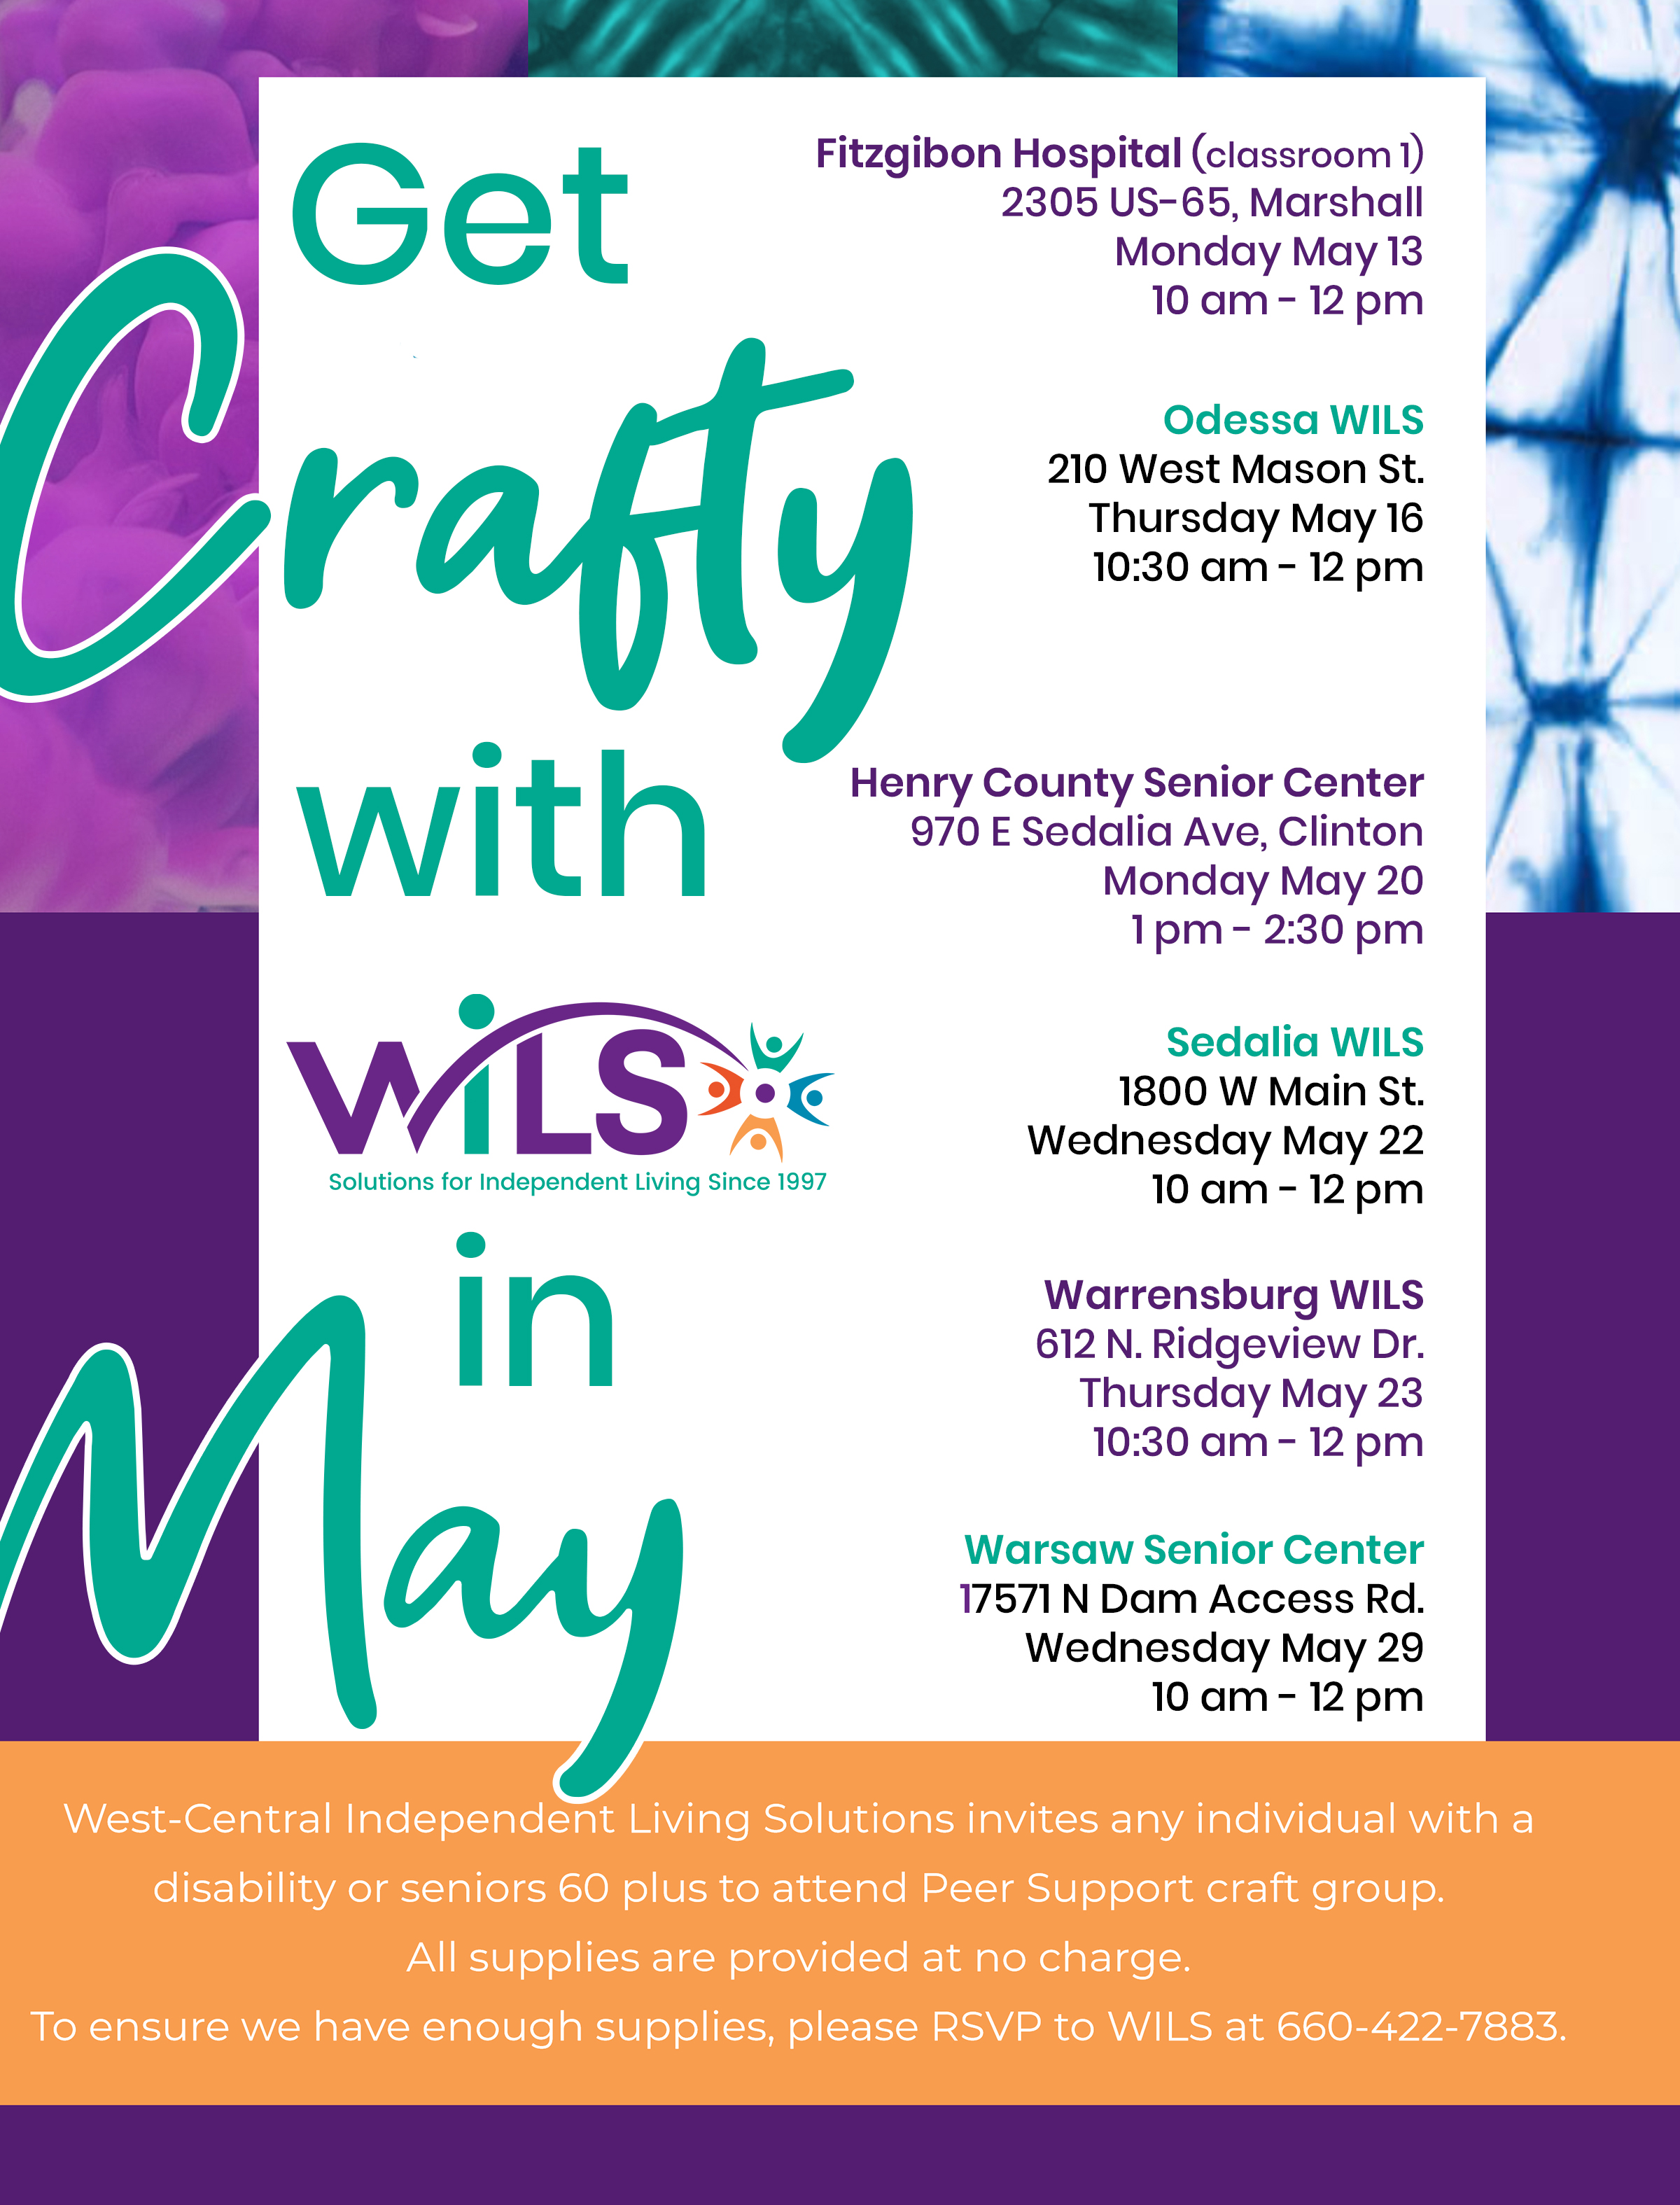 Peer Support Lafayette County Craft Group @ Odessa WILS